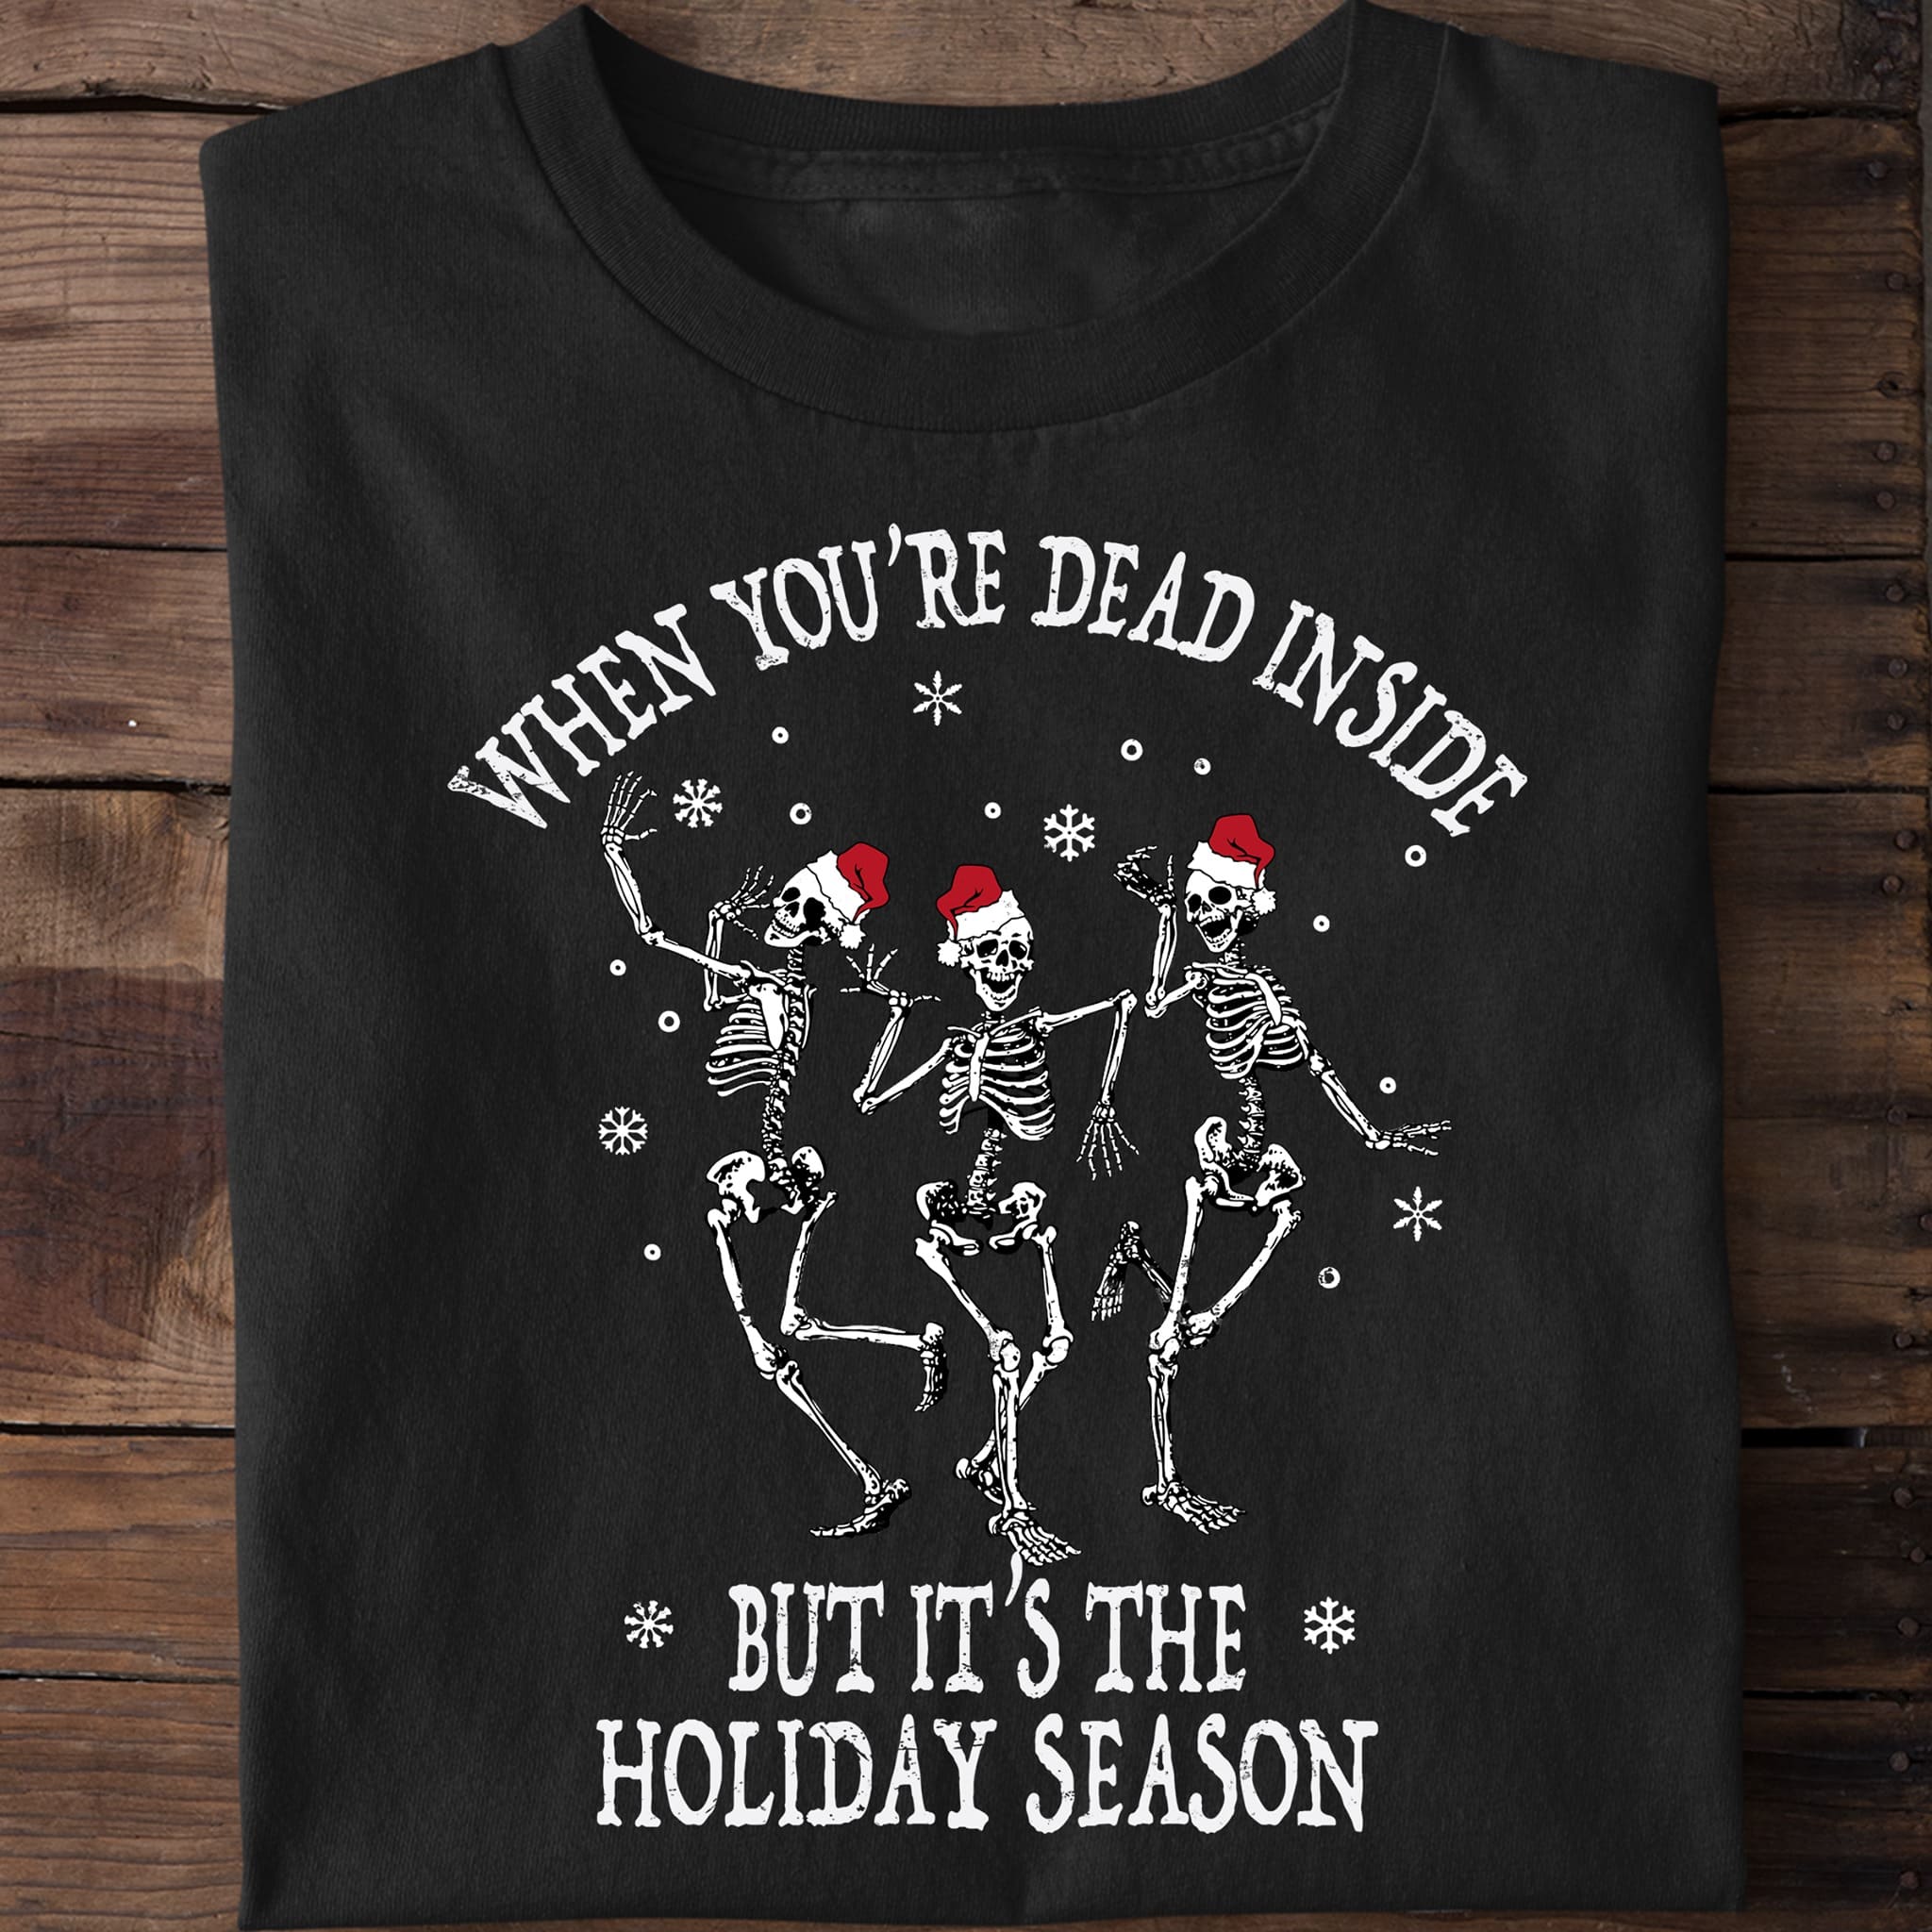 When you're dead inside but it's the holiday season - Christmas holiday T-shirt, Christmas dancing skull